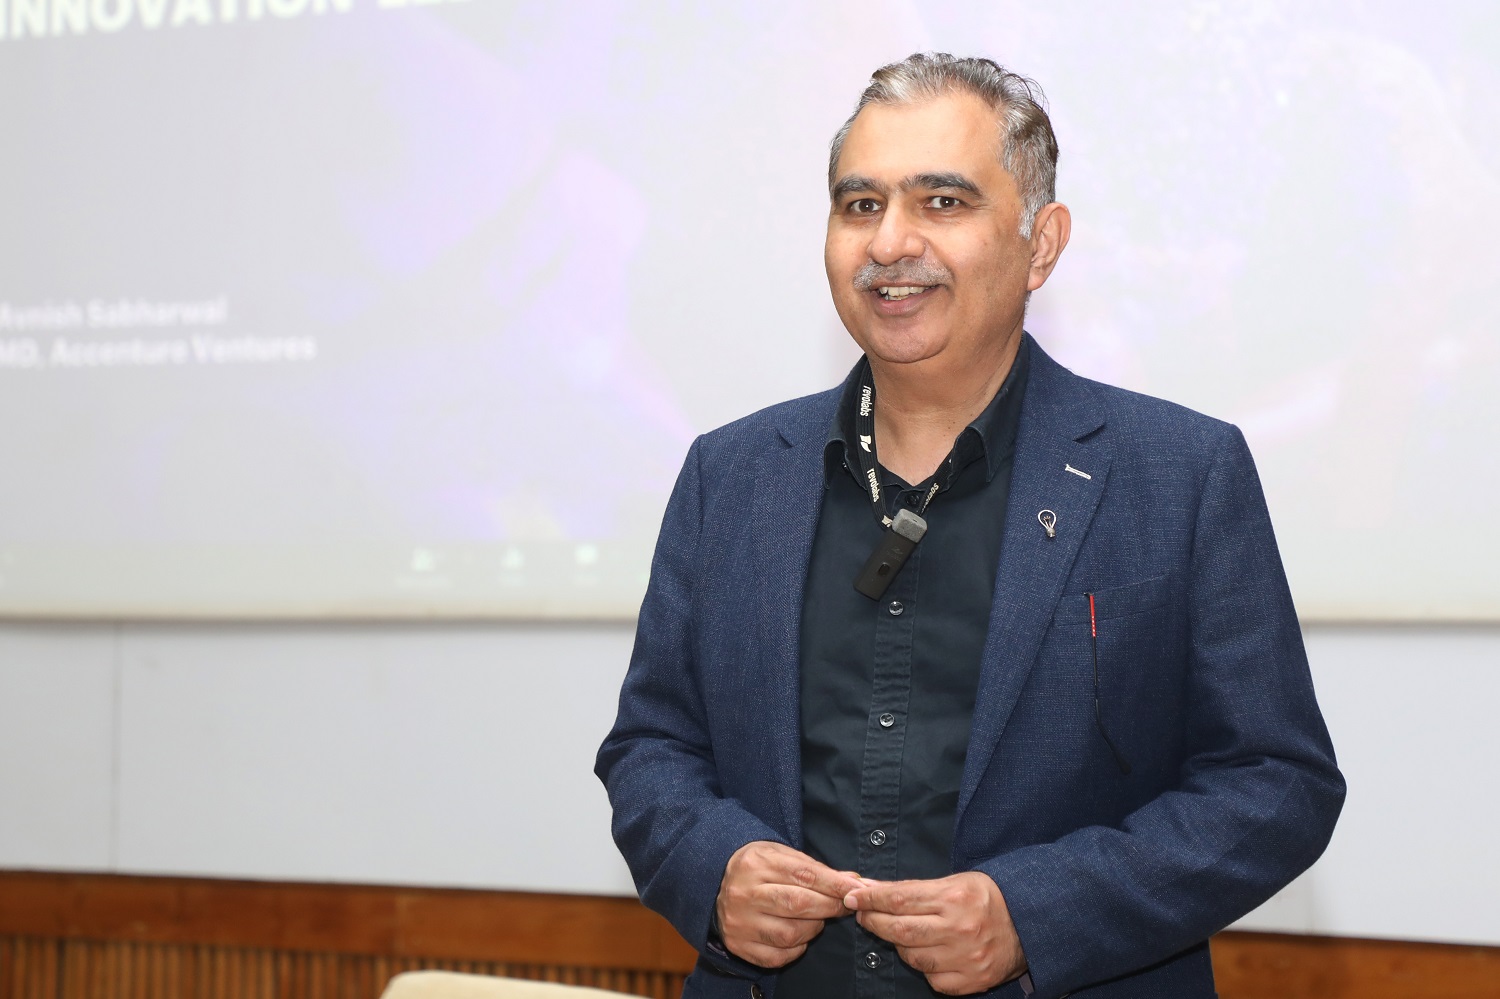 Avnish Sabharwal, Managing Director, Accenture Ventures and Open Innovation, speaks during the closing ceremony of Eximius 2022.